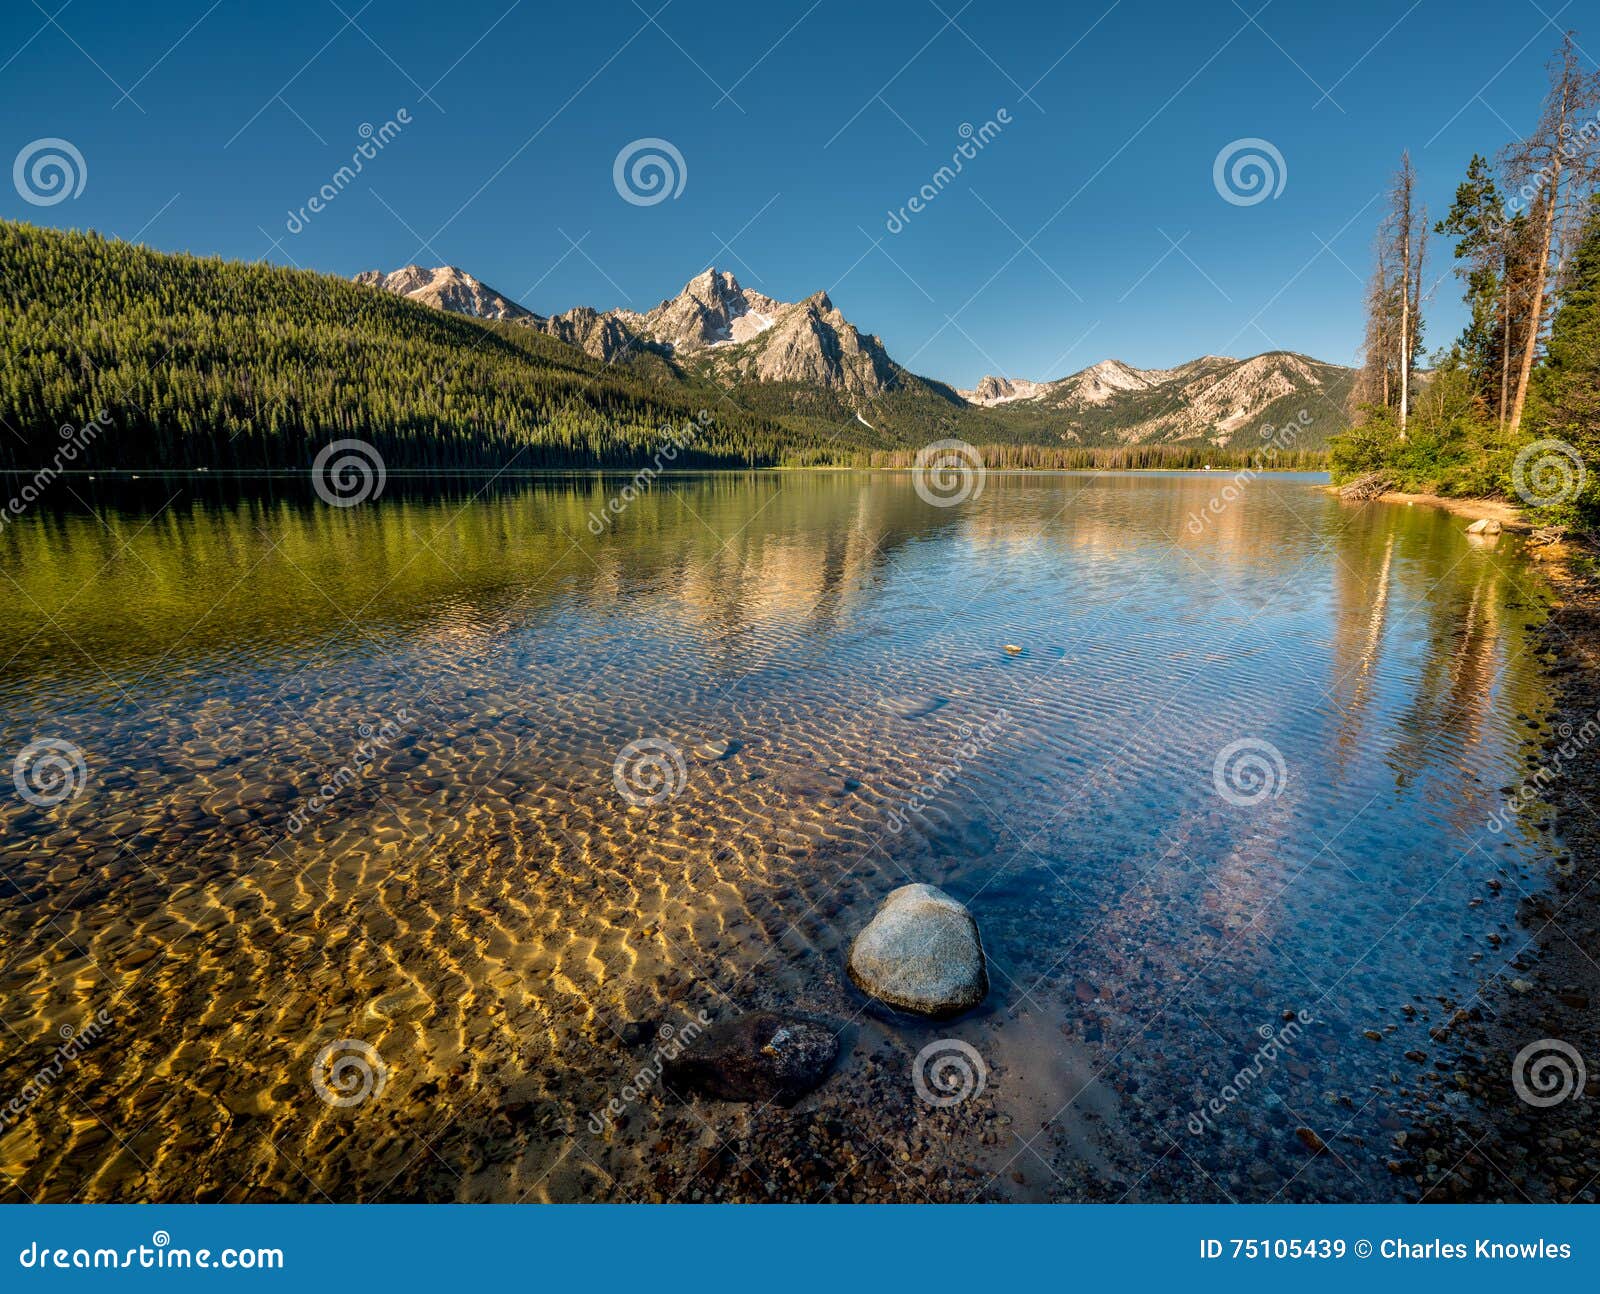 Stanley Lake In Idaho Morning With Reflection Stock Image Image Of